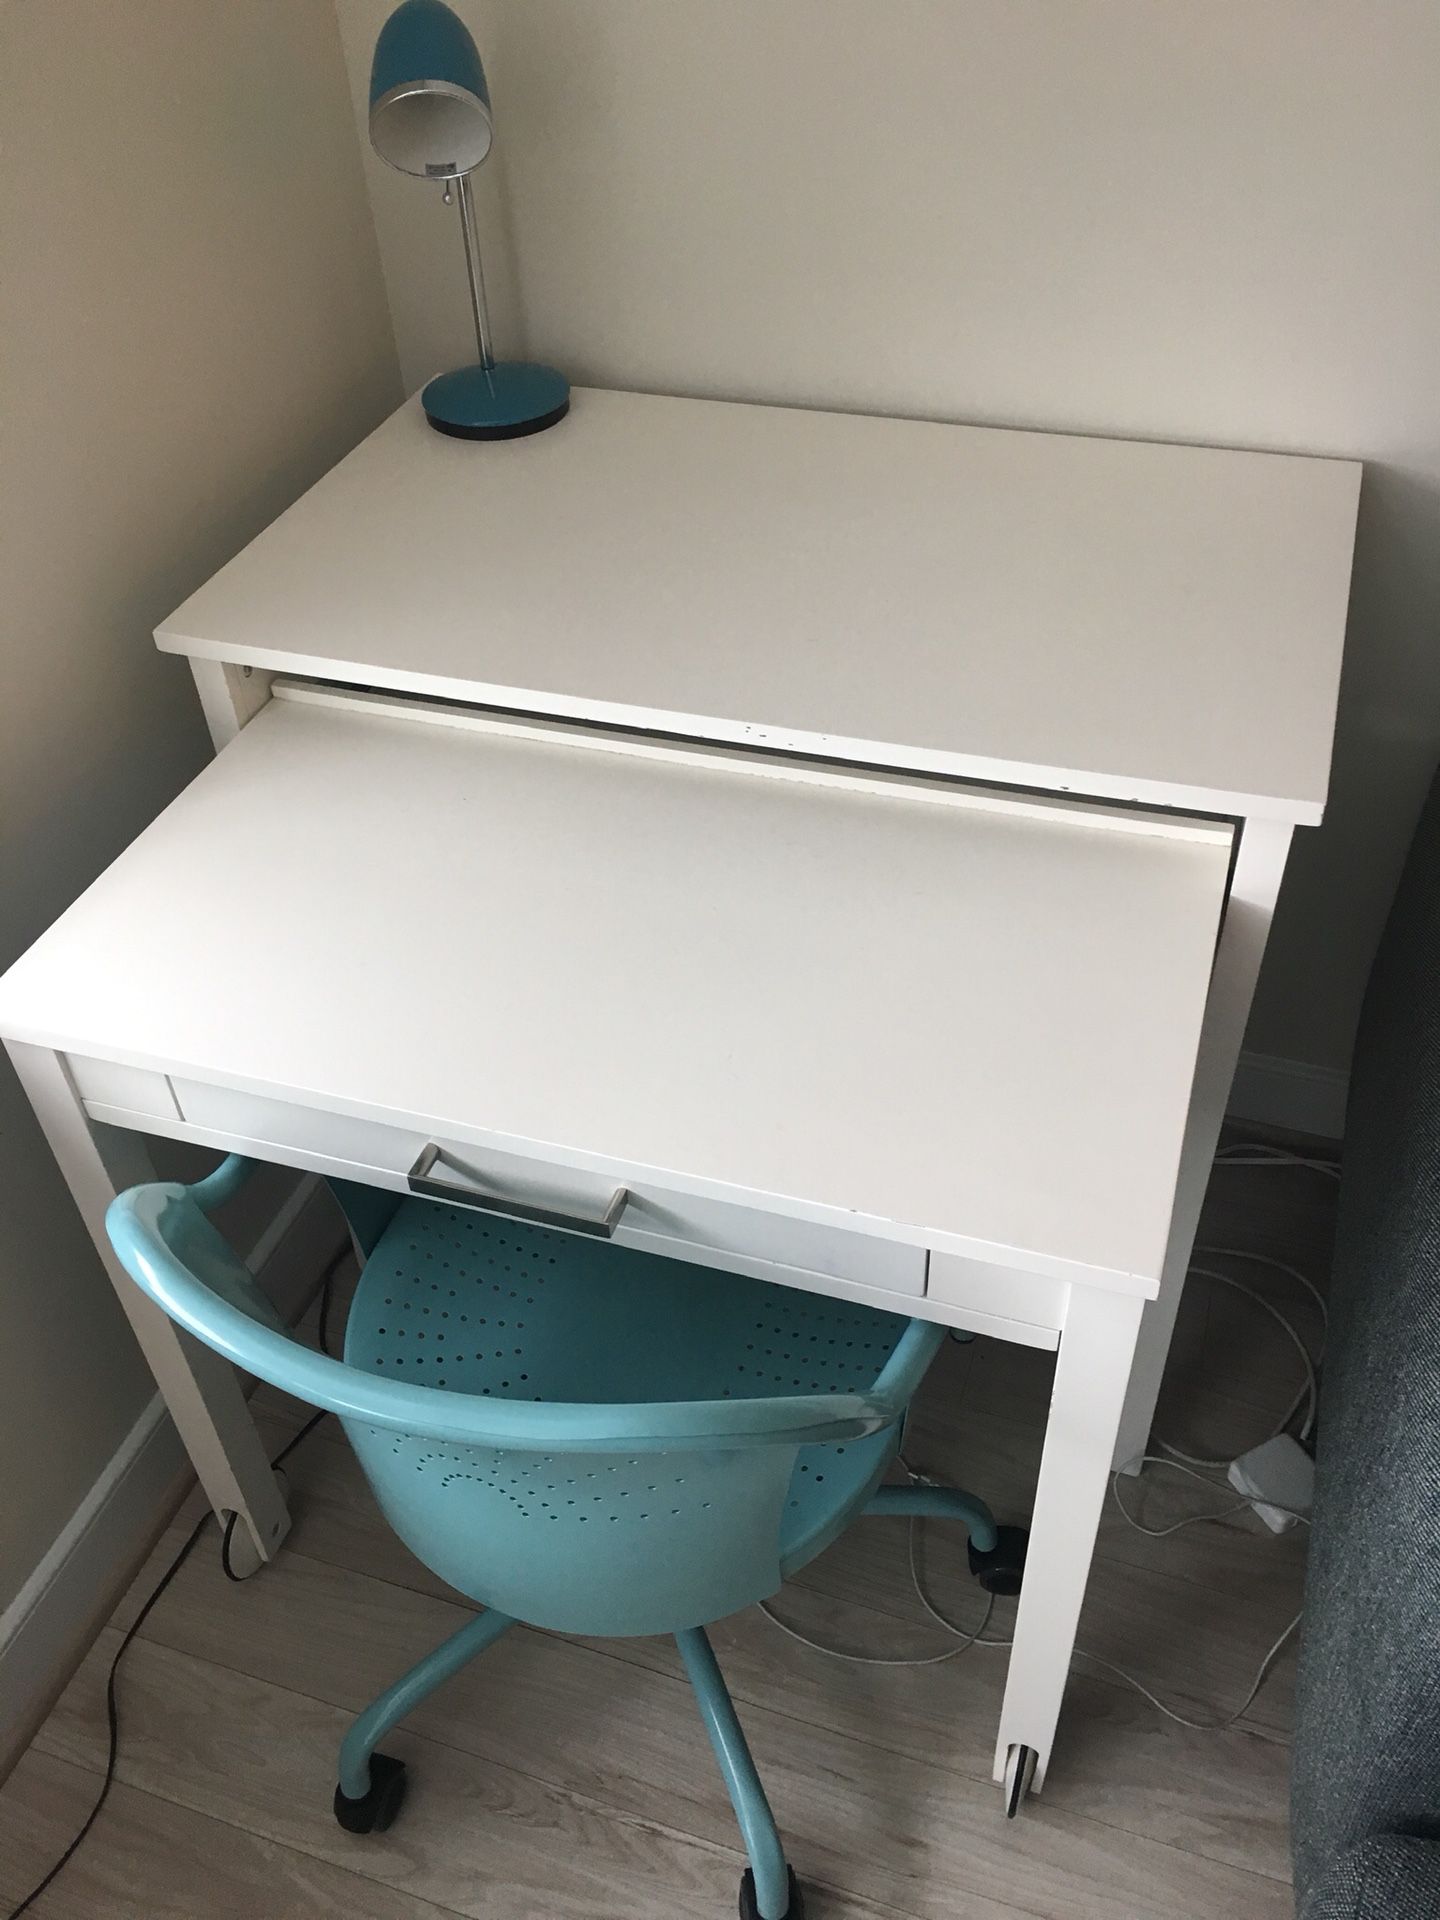 Writing desk with extension and chair